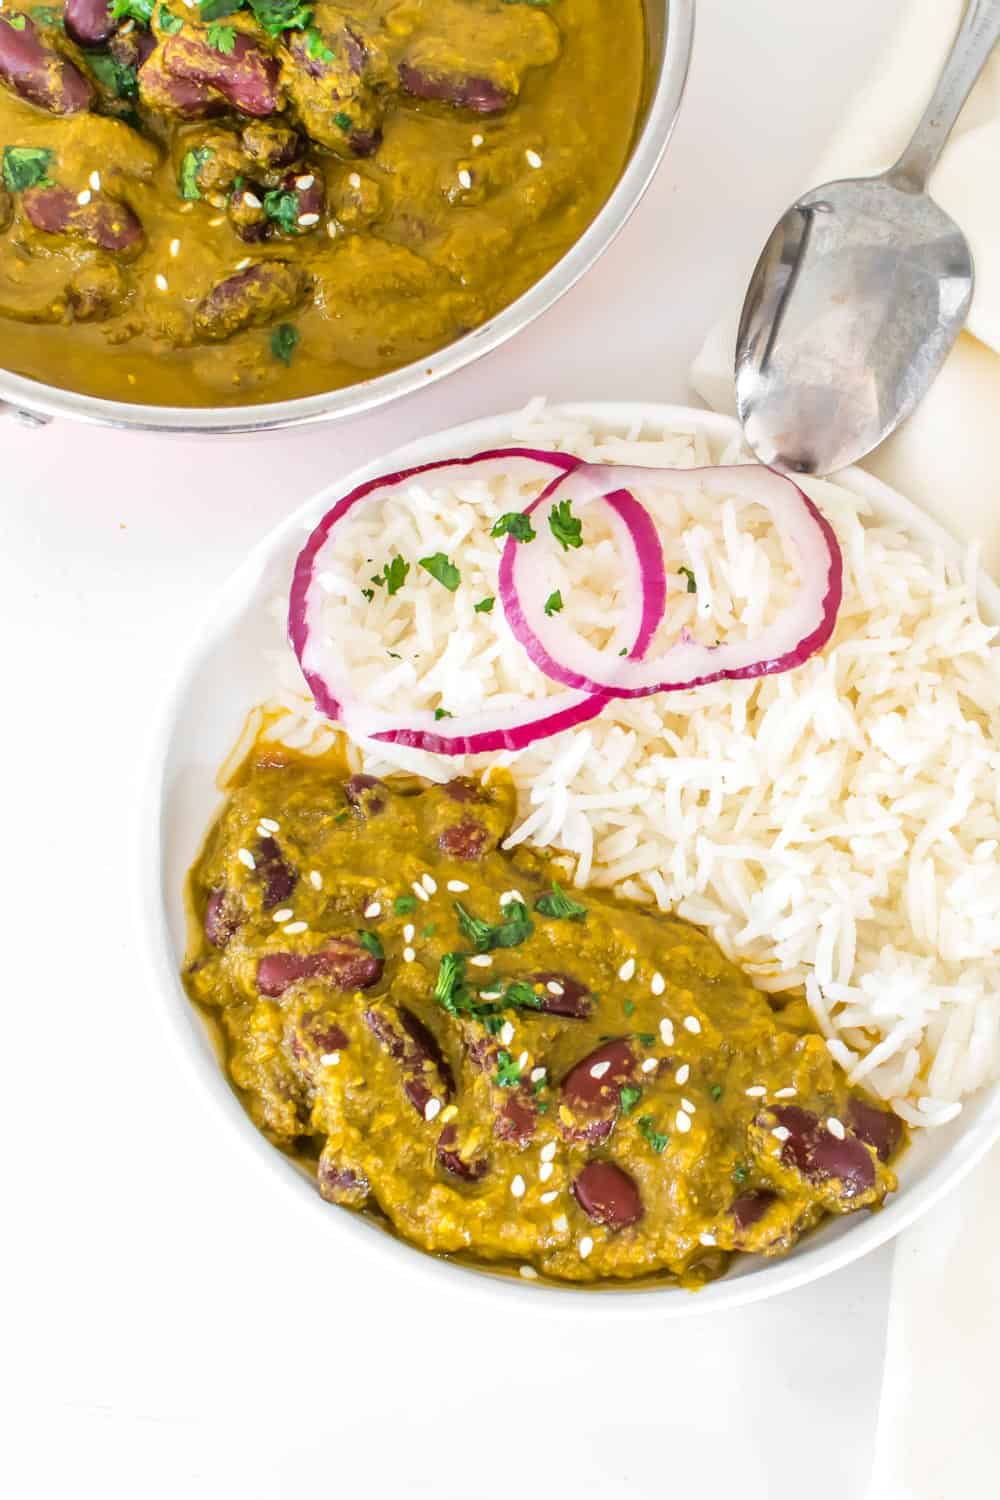 top view of the served rajma masala with rice along with the serving kadhai.